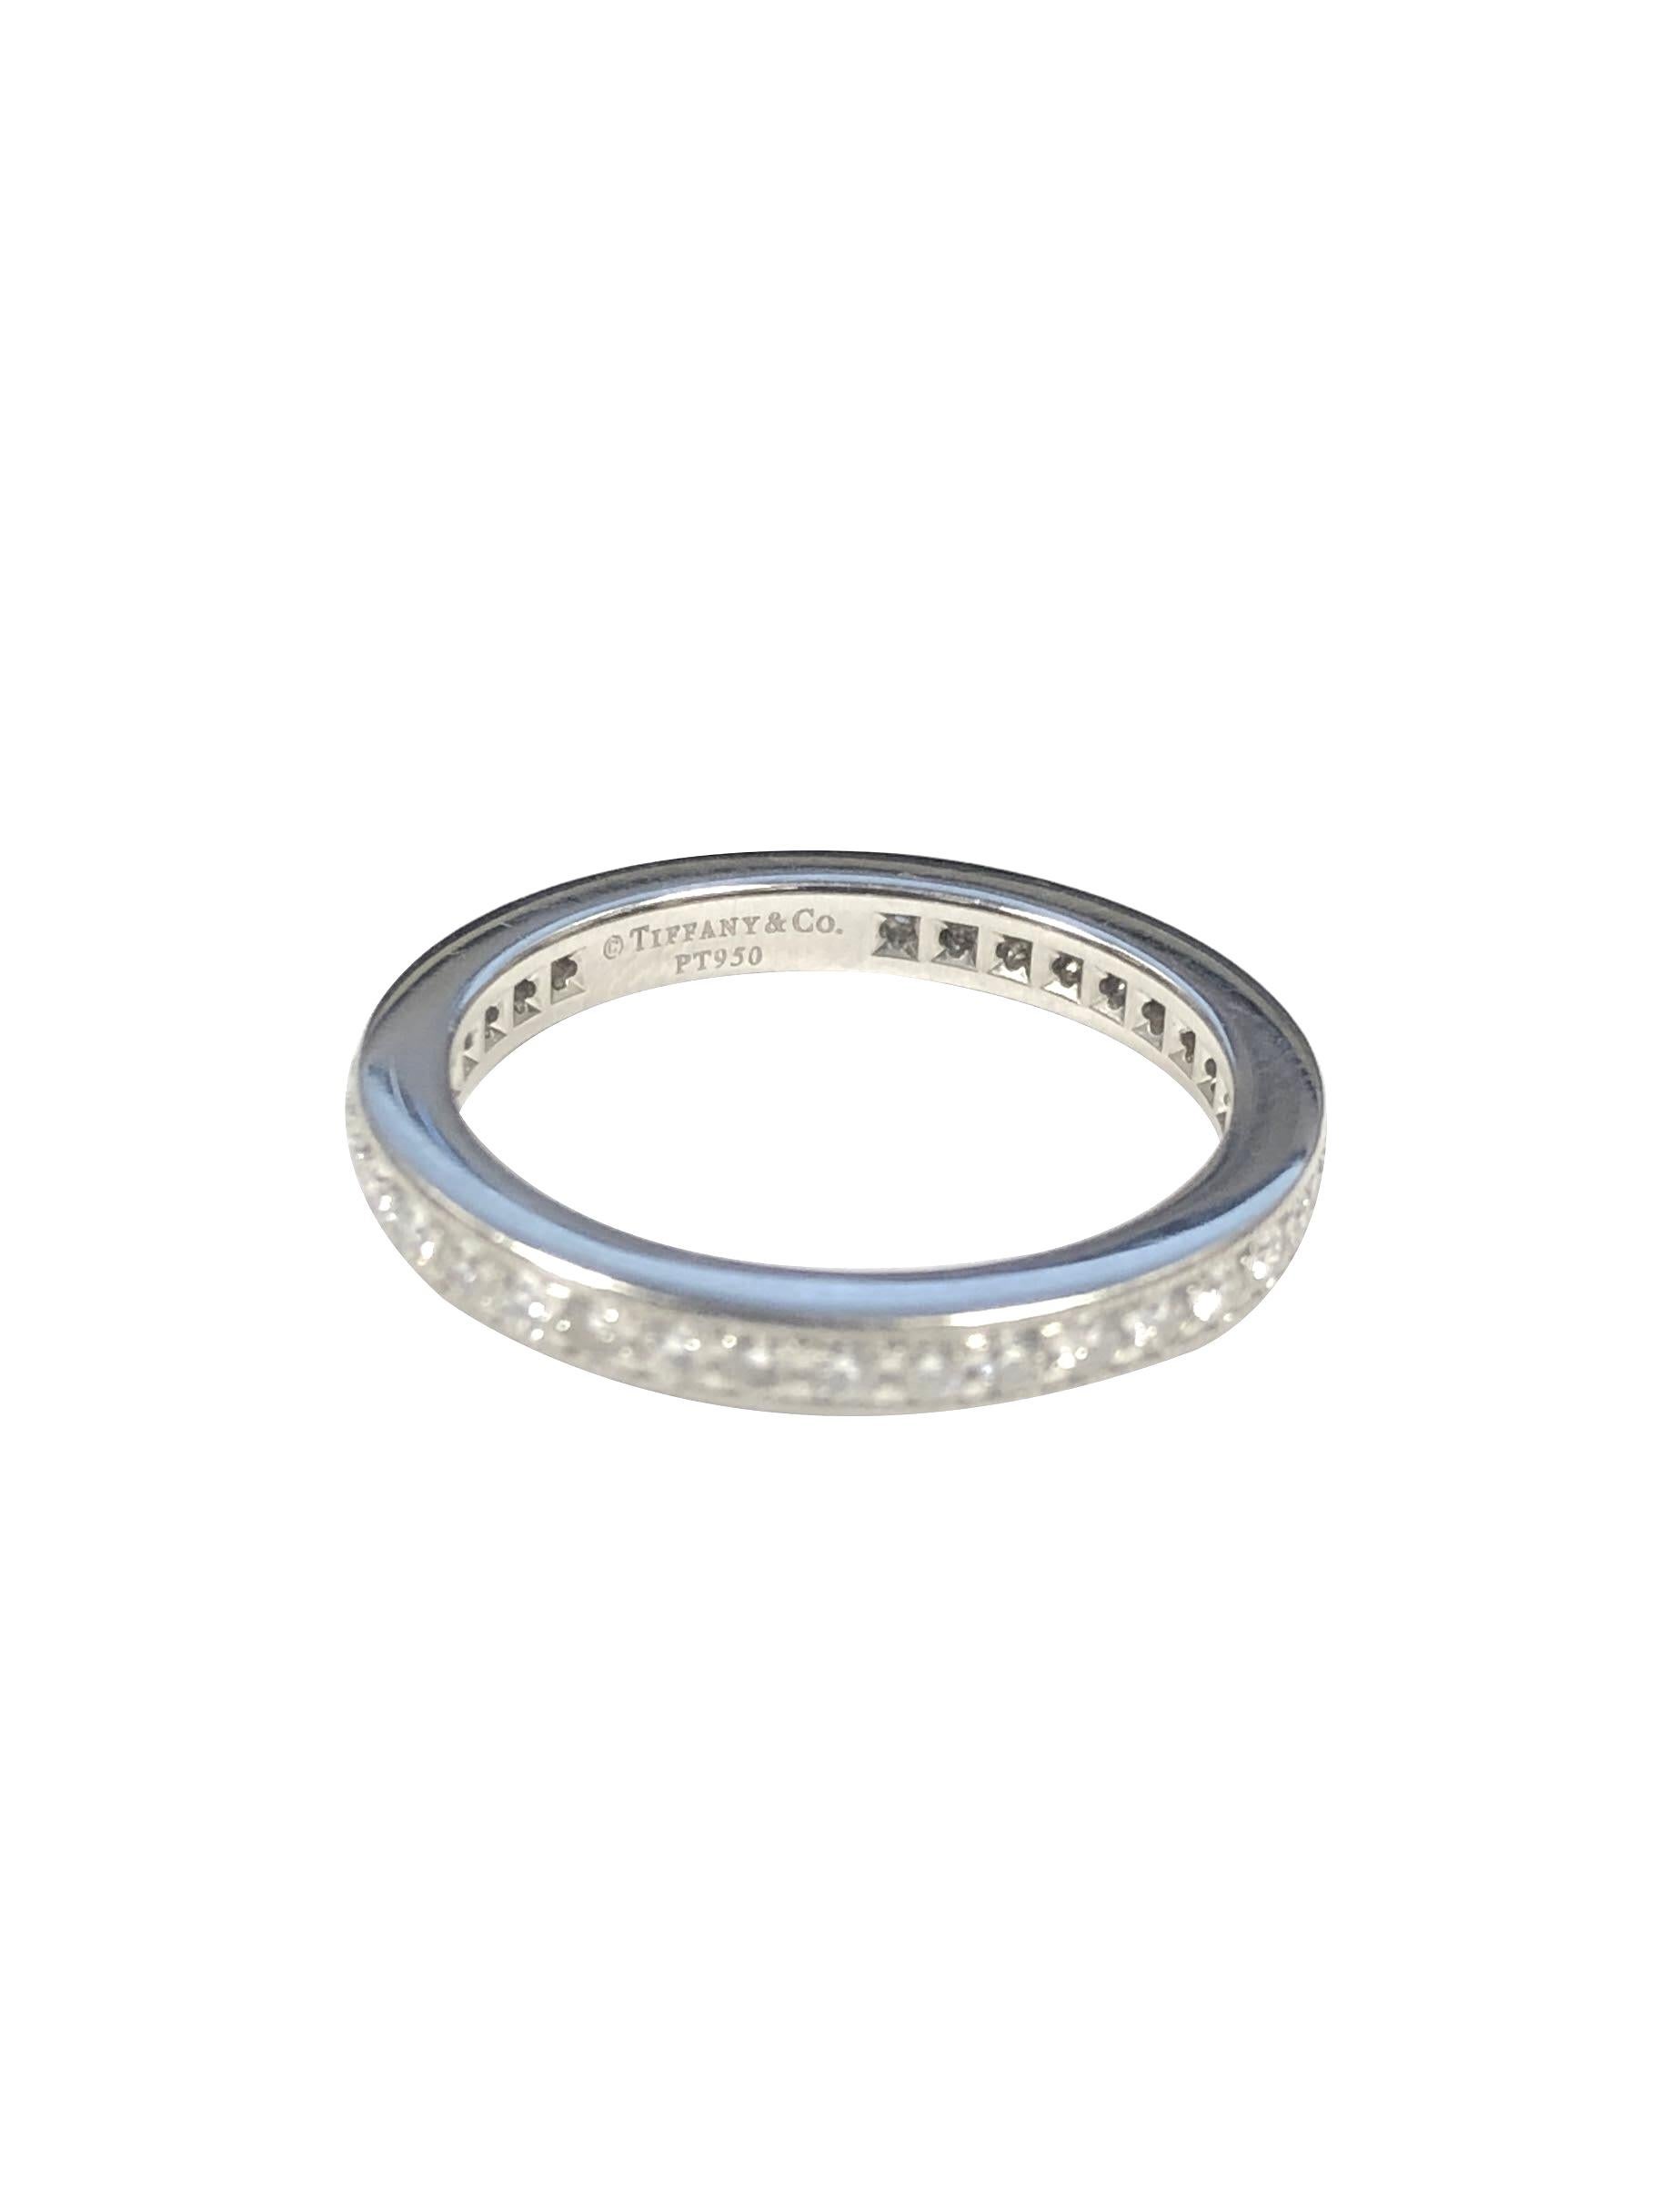 Circa 2010 Tiffany & Company Platinum Eternity Band Ring, 2 M.M. wide and containing Round Brilliant cut Diamonds totaling 1 Carat. Finger size 5. 